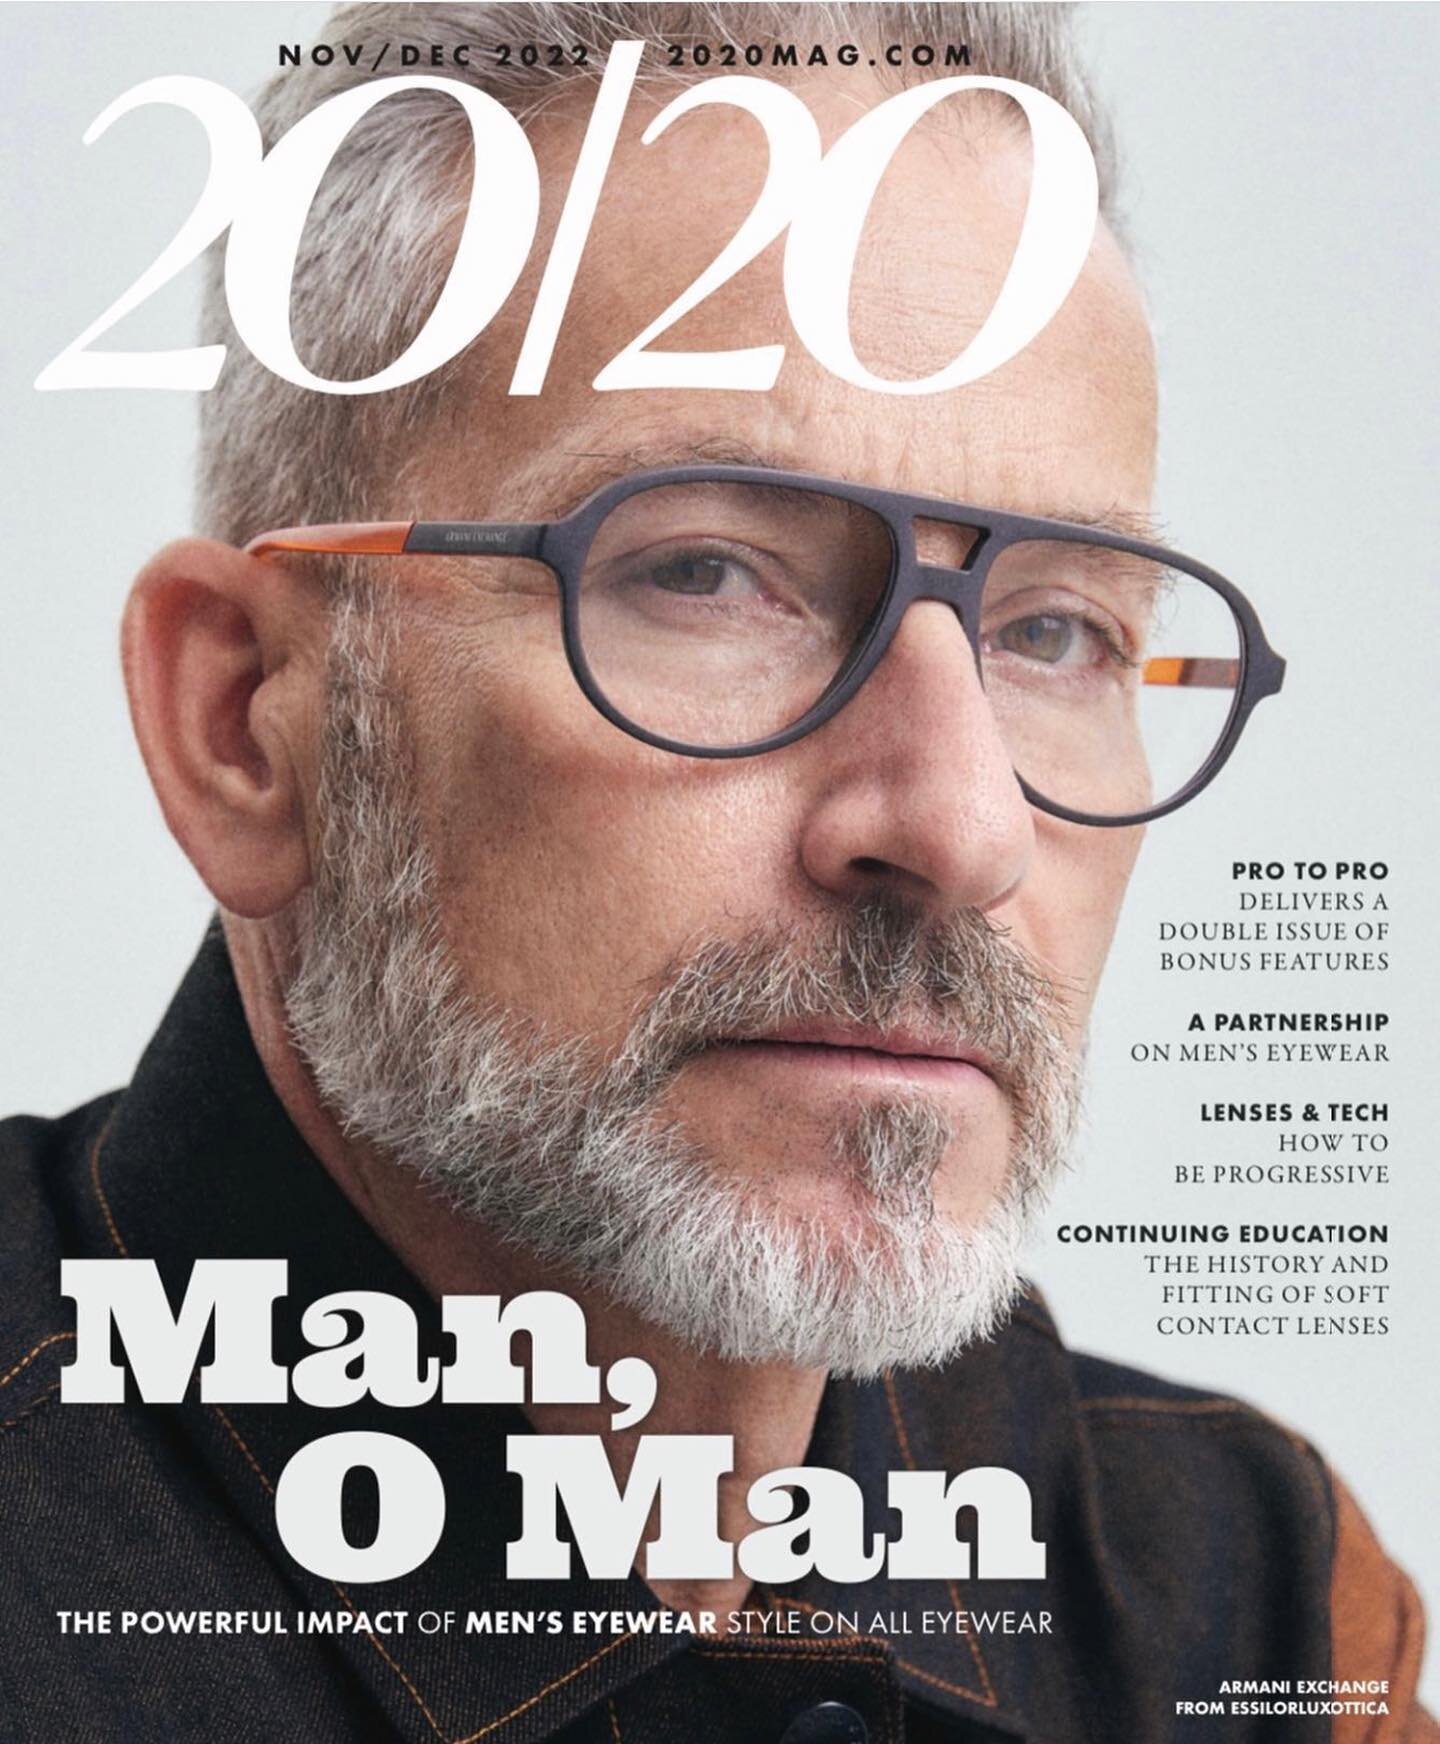 Hurray! My FIRST Magazine Cover! @2020mag #model Eyewear at its finest @bellaagency